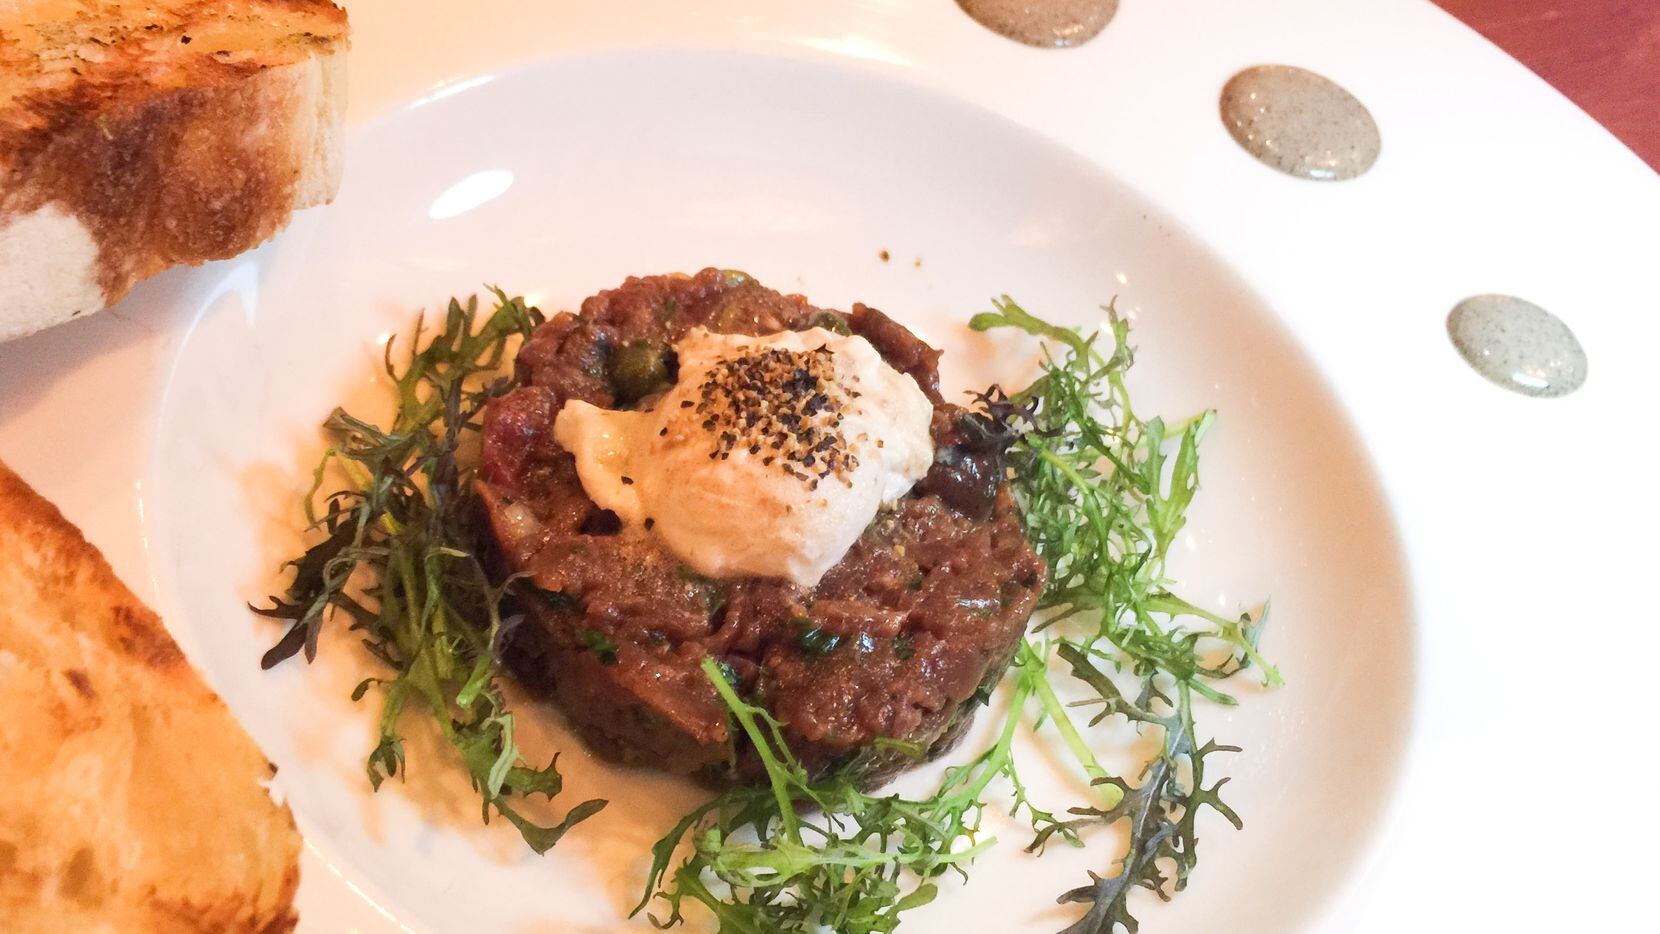 Chef Nick Amoriello's venison tartare at Kitchen LTO. Amoriello is in charge of the kitchen for a sixth-month stint chef at the "permanent pop-up" restaurant in Trinity Groves. Game meats such as antelope and rabbit are spotlighted on his menu. 